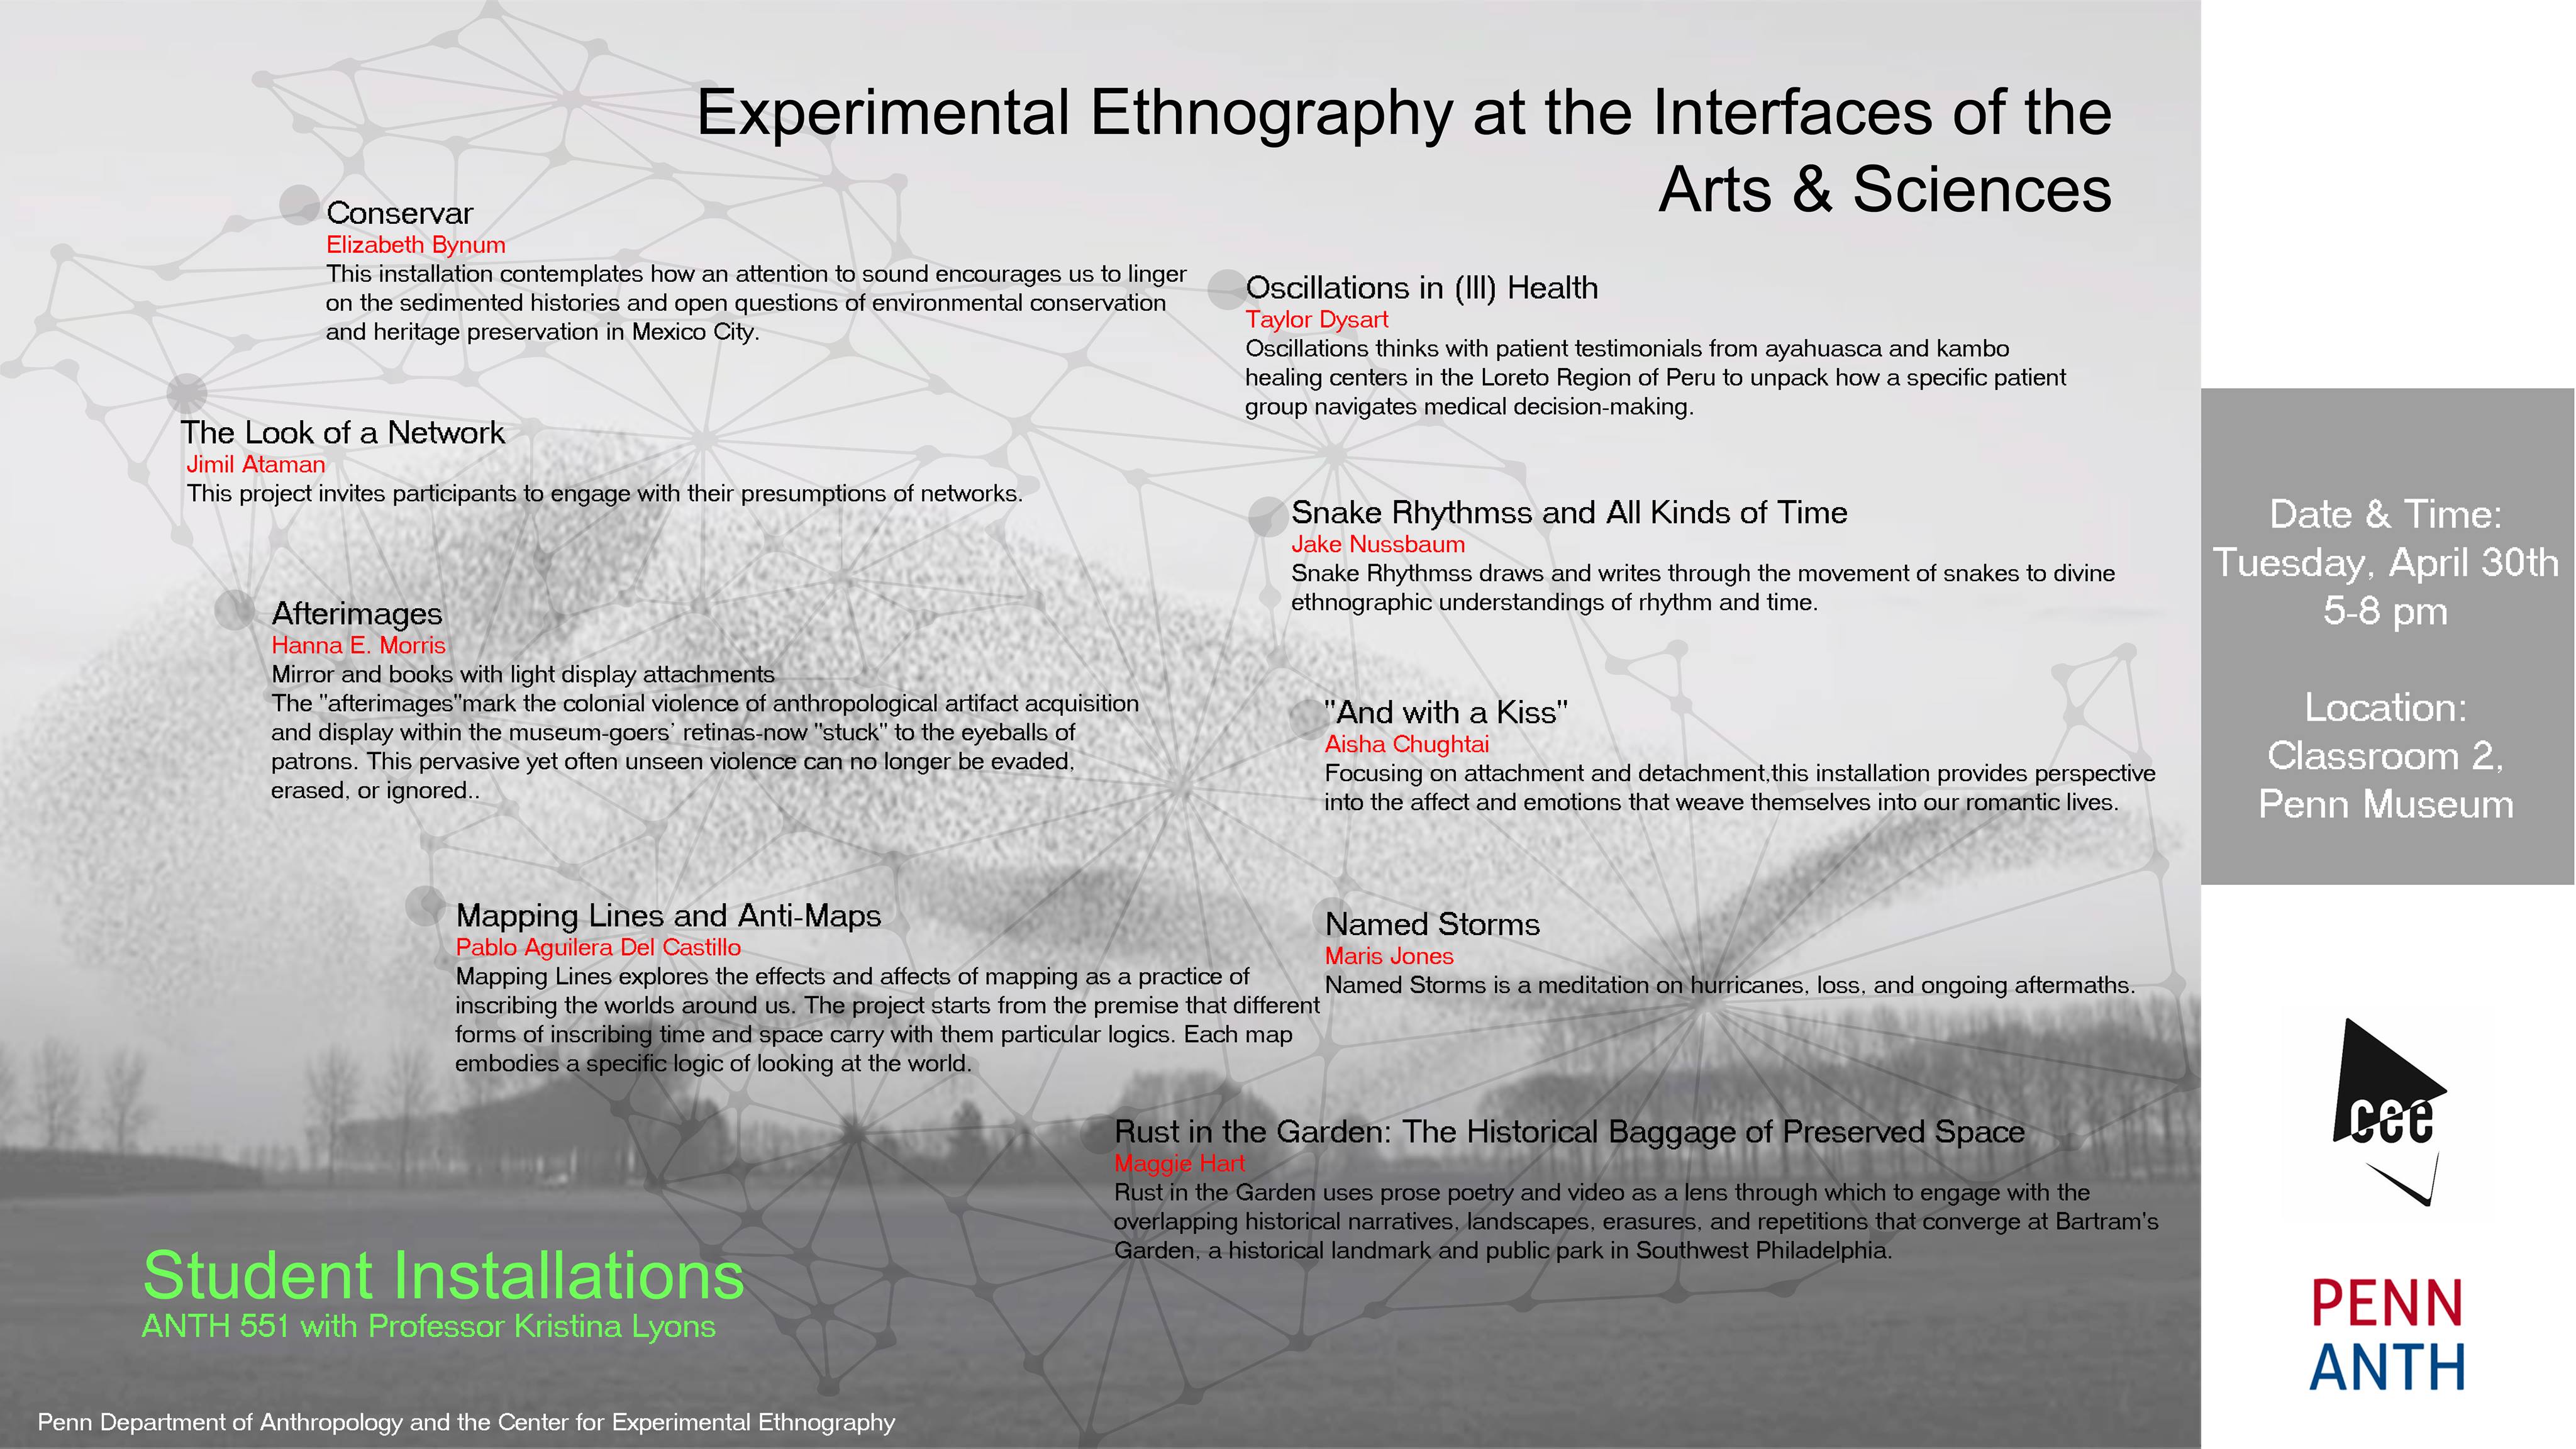 Student Installation: Experimental Ethnography at the Interfaces of the Arts & Sciences